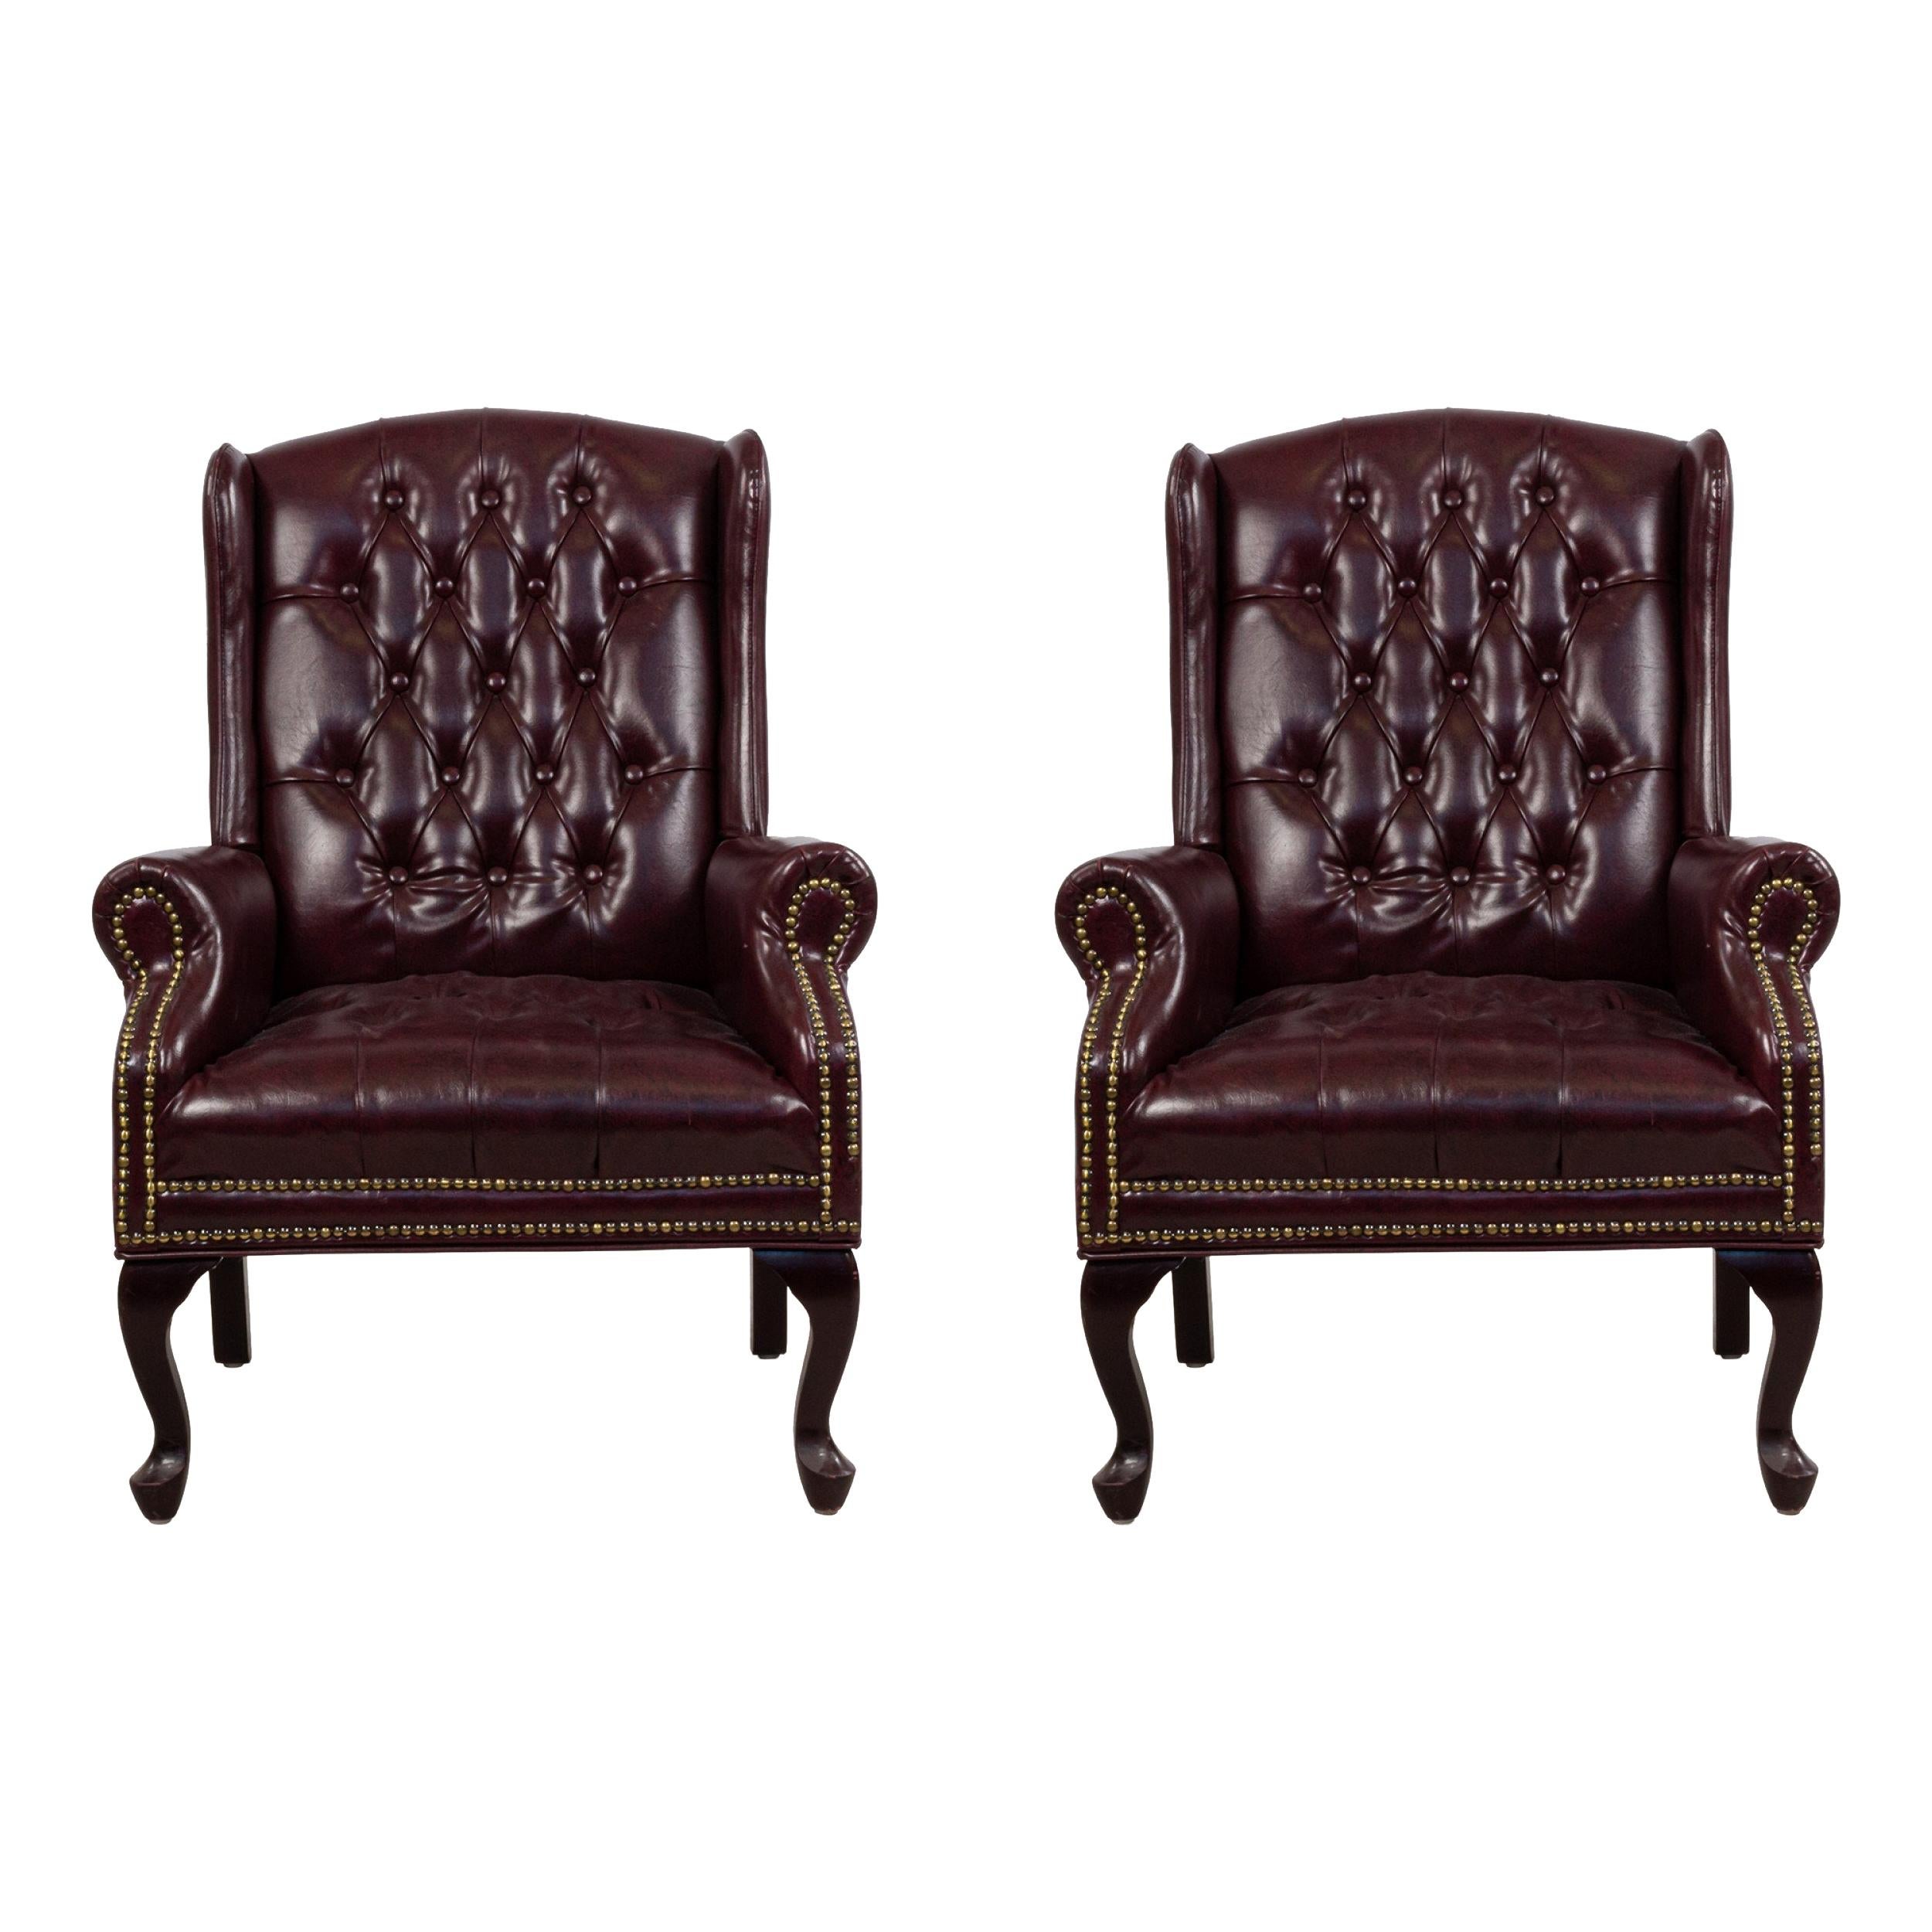 Burgundy Tufted Leather Wing Back Chairs